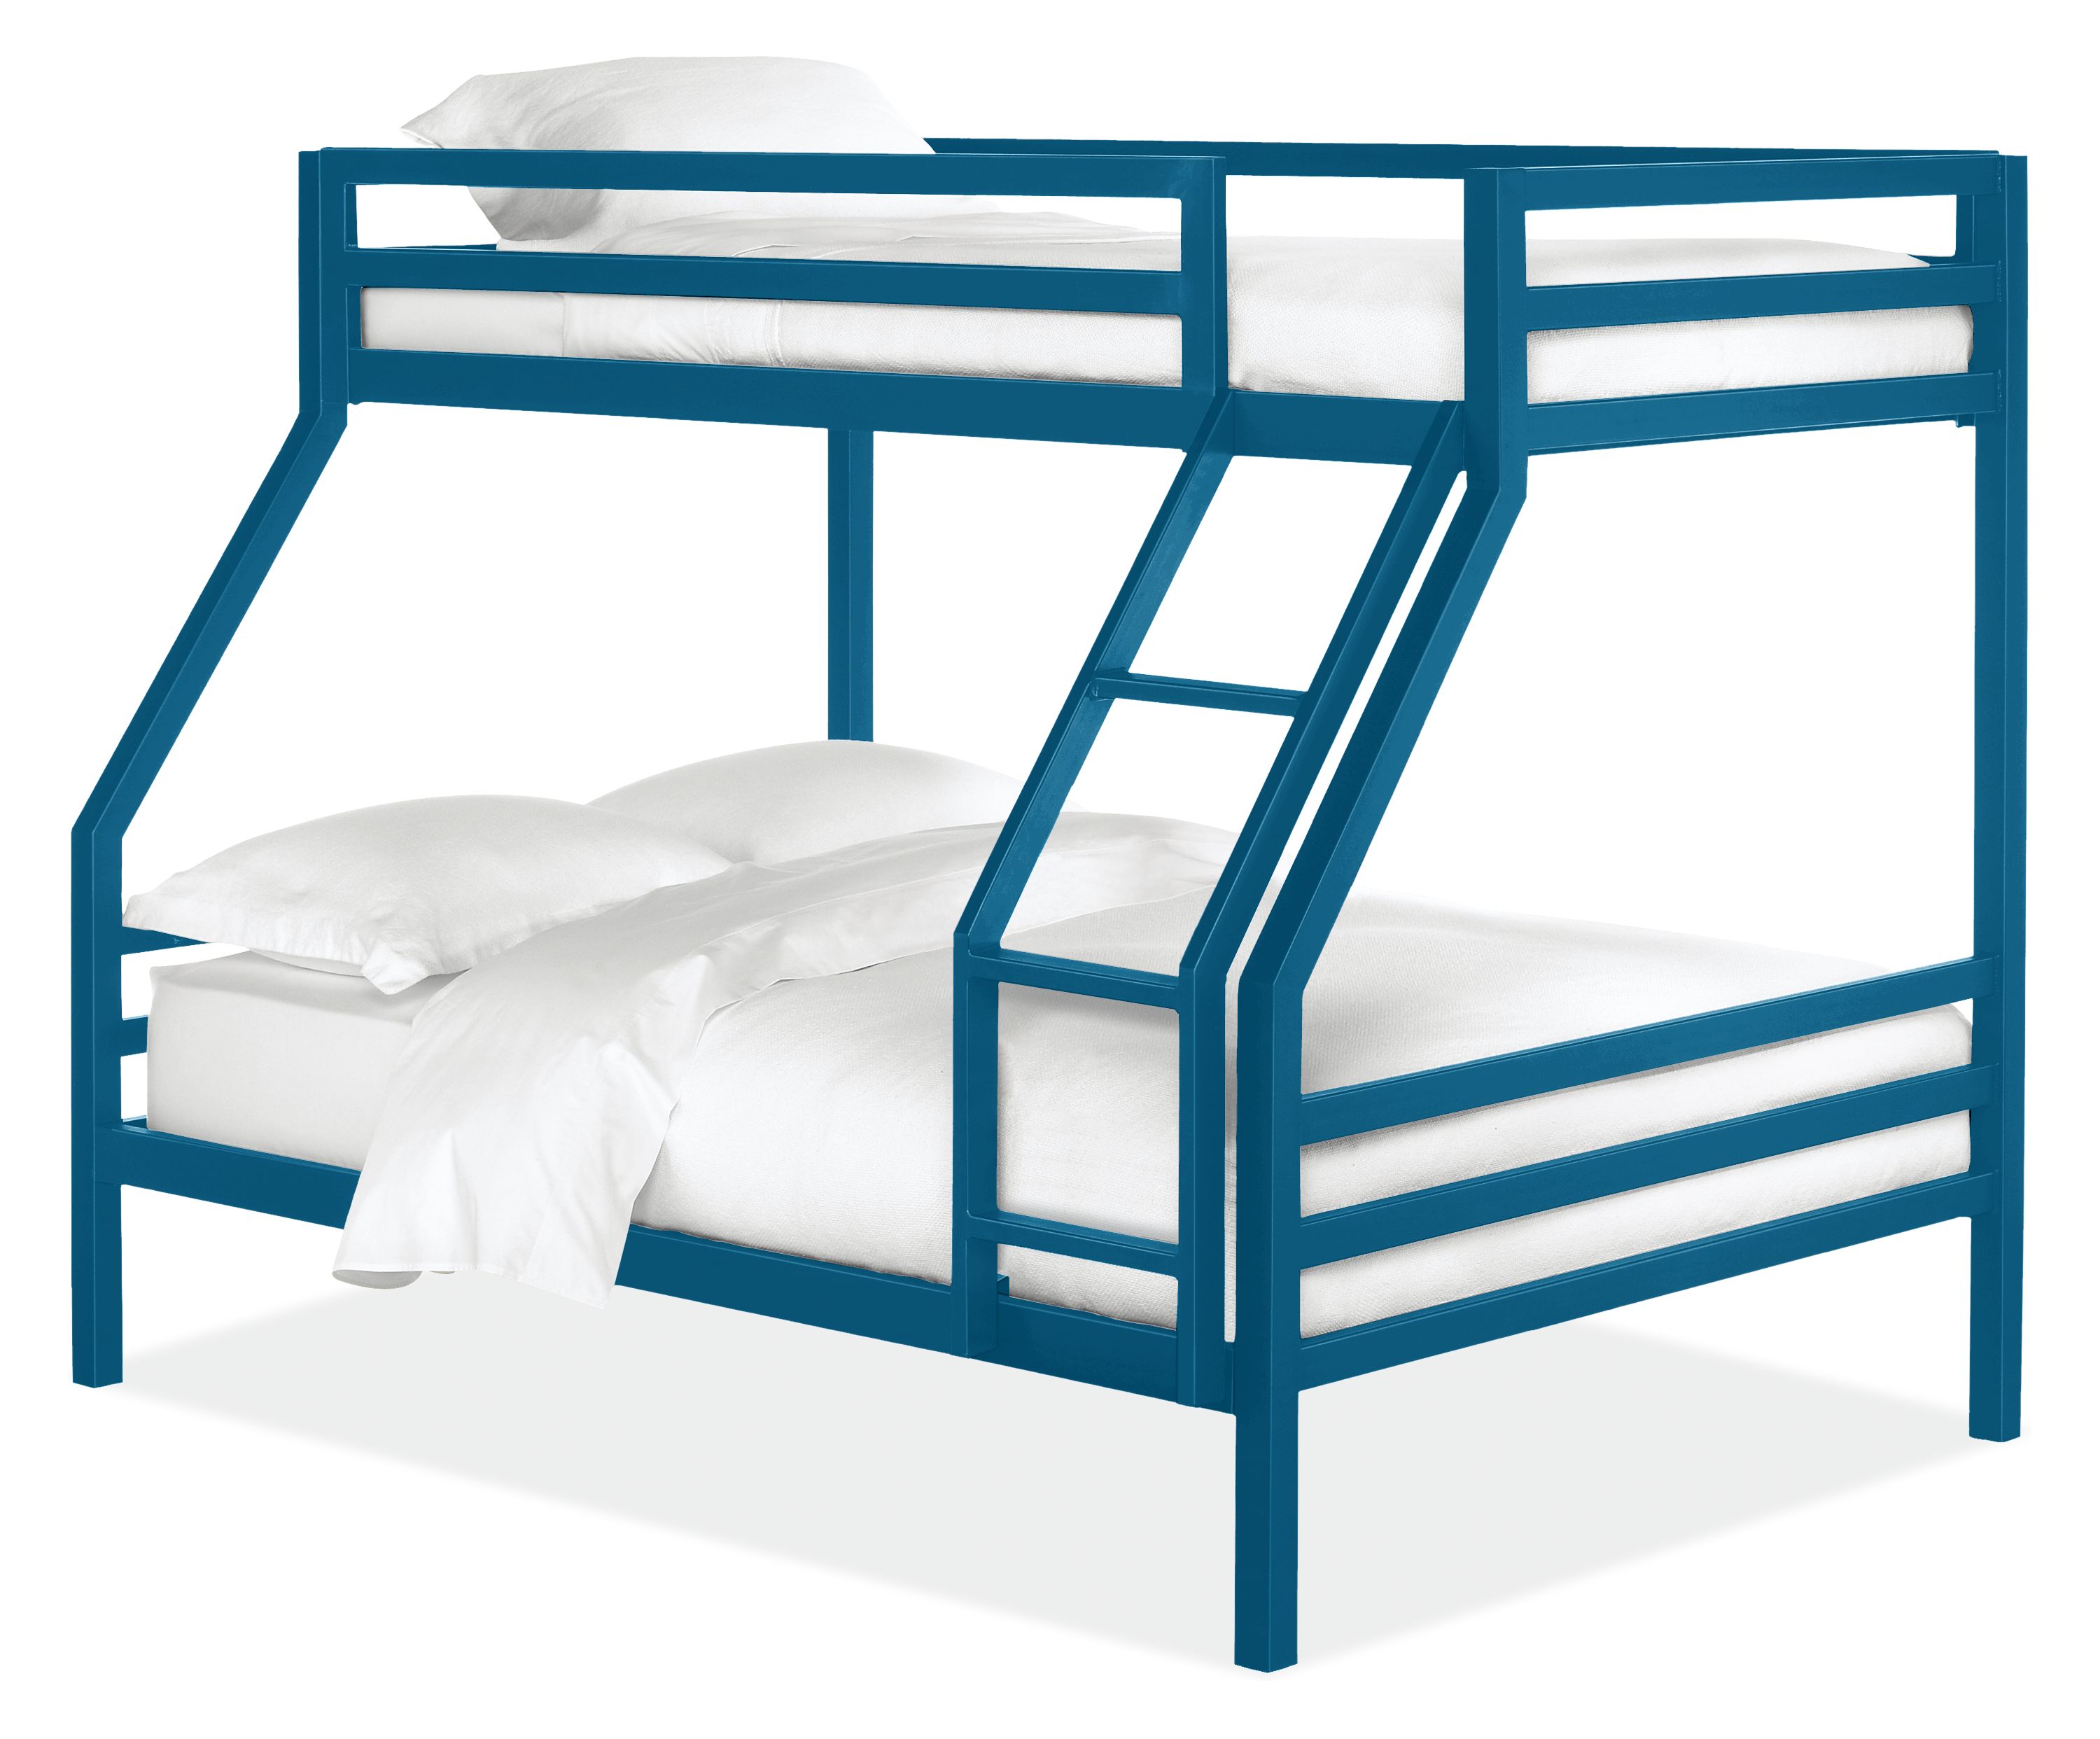 Fort Bunk Beds In Colors Twin Over, Bunk Bed With Fort Underneath